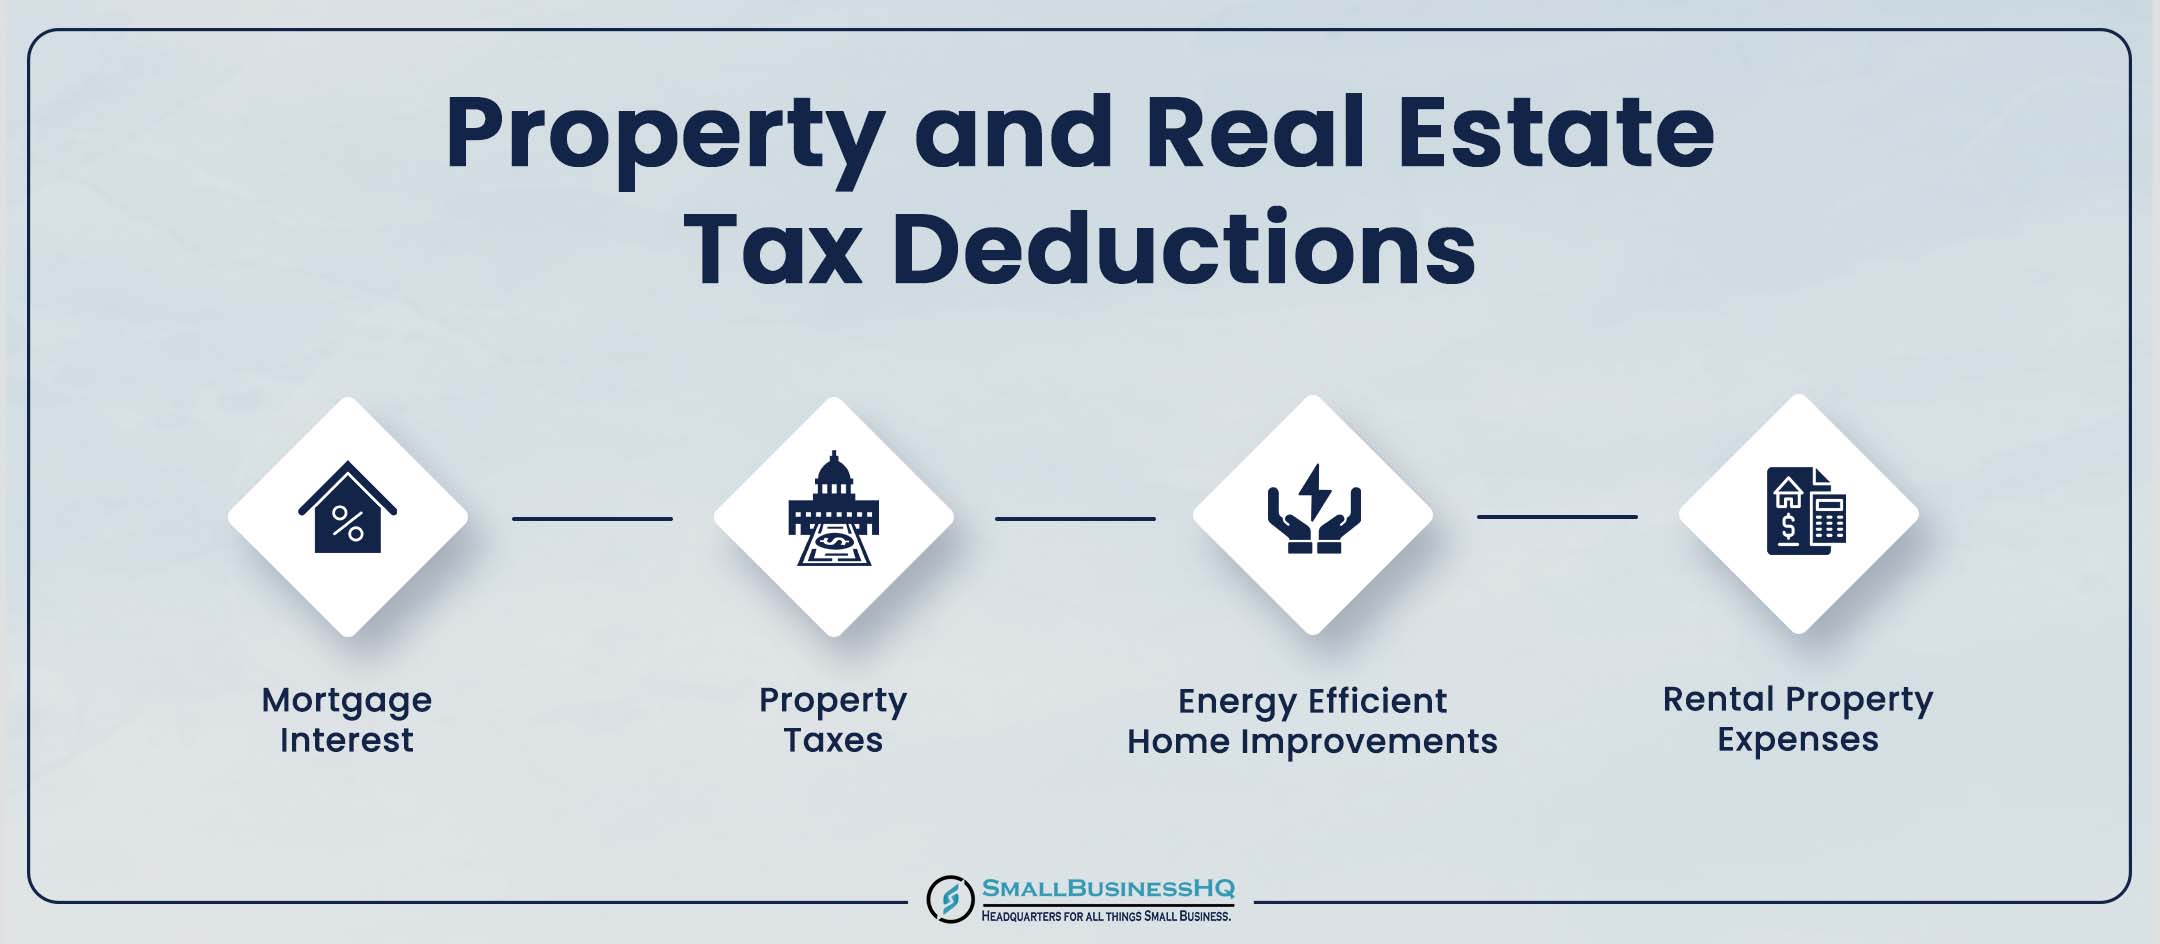 Property and Real Estate Tax Deductions